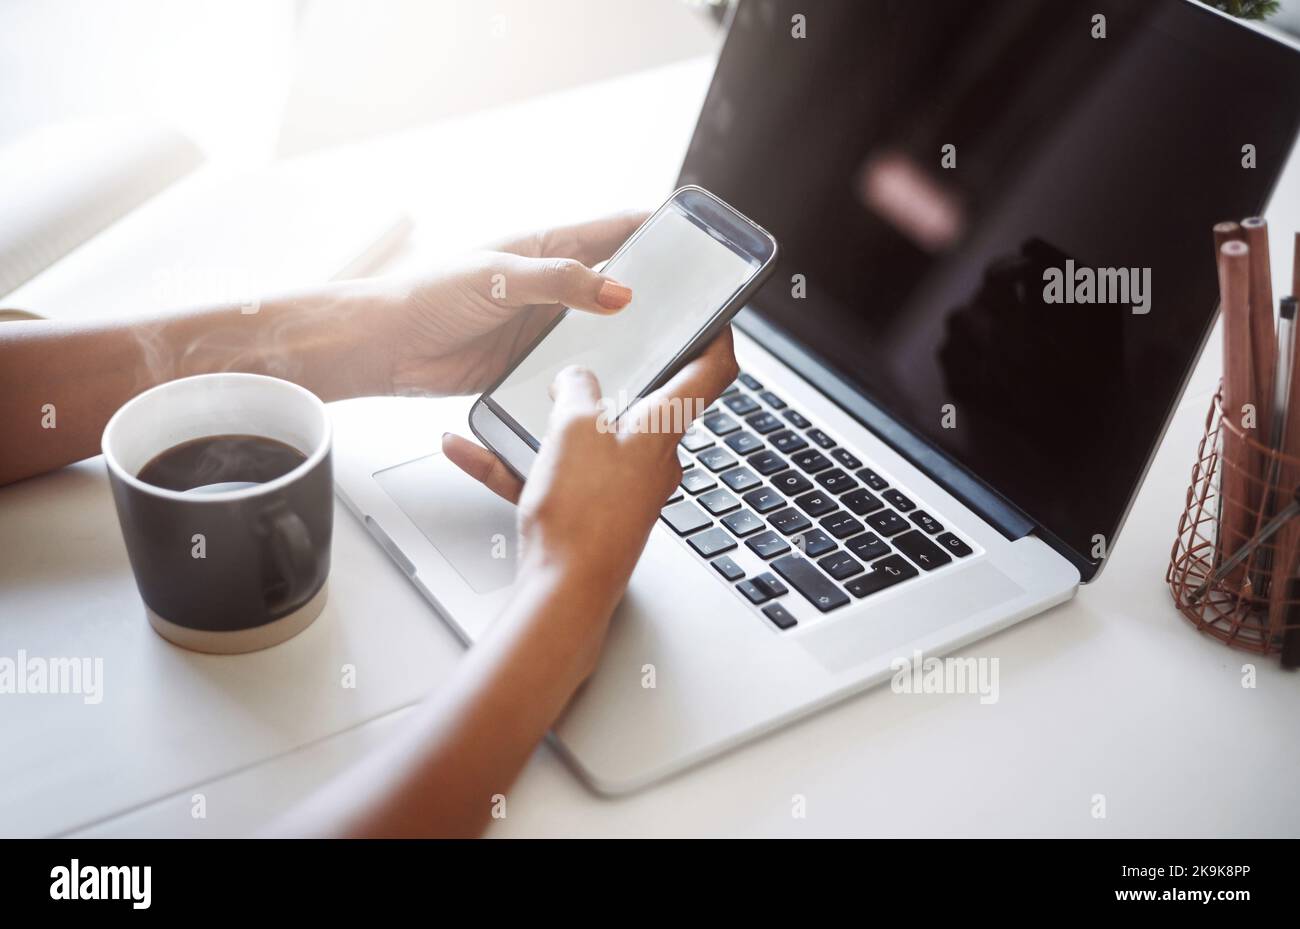 Life of a designer, contacting clients from multiple devices. Closeup shot of an unrecognizable female designer using a cellphone in her home office. Stock Photo